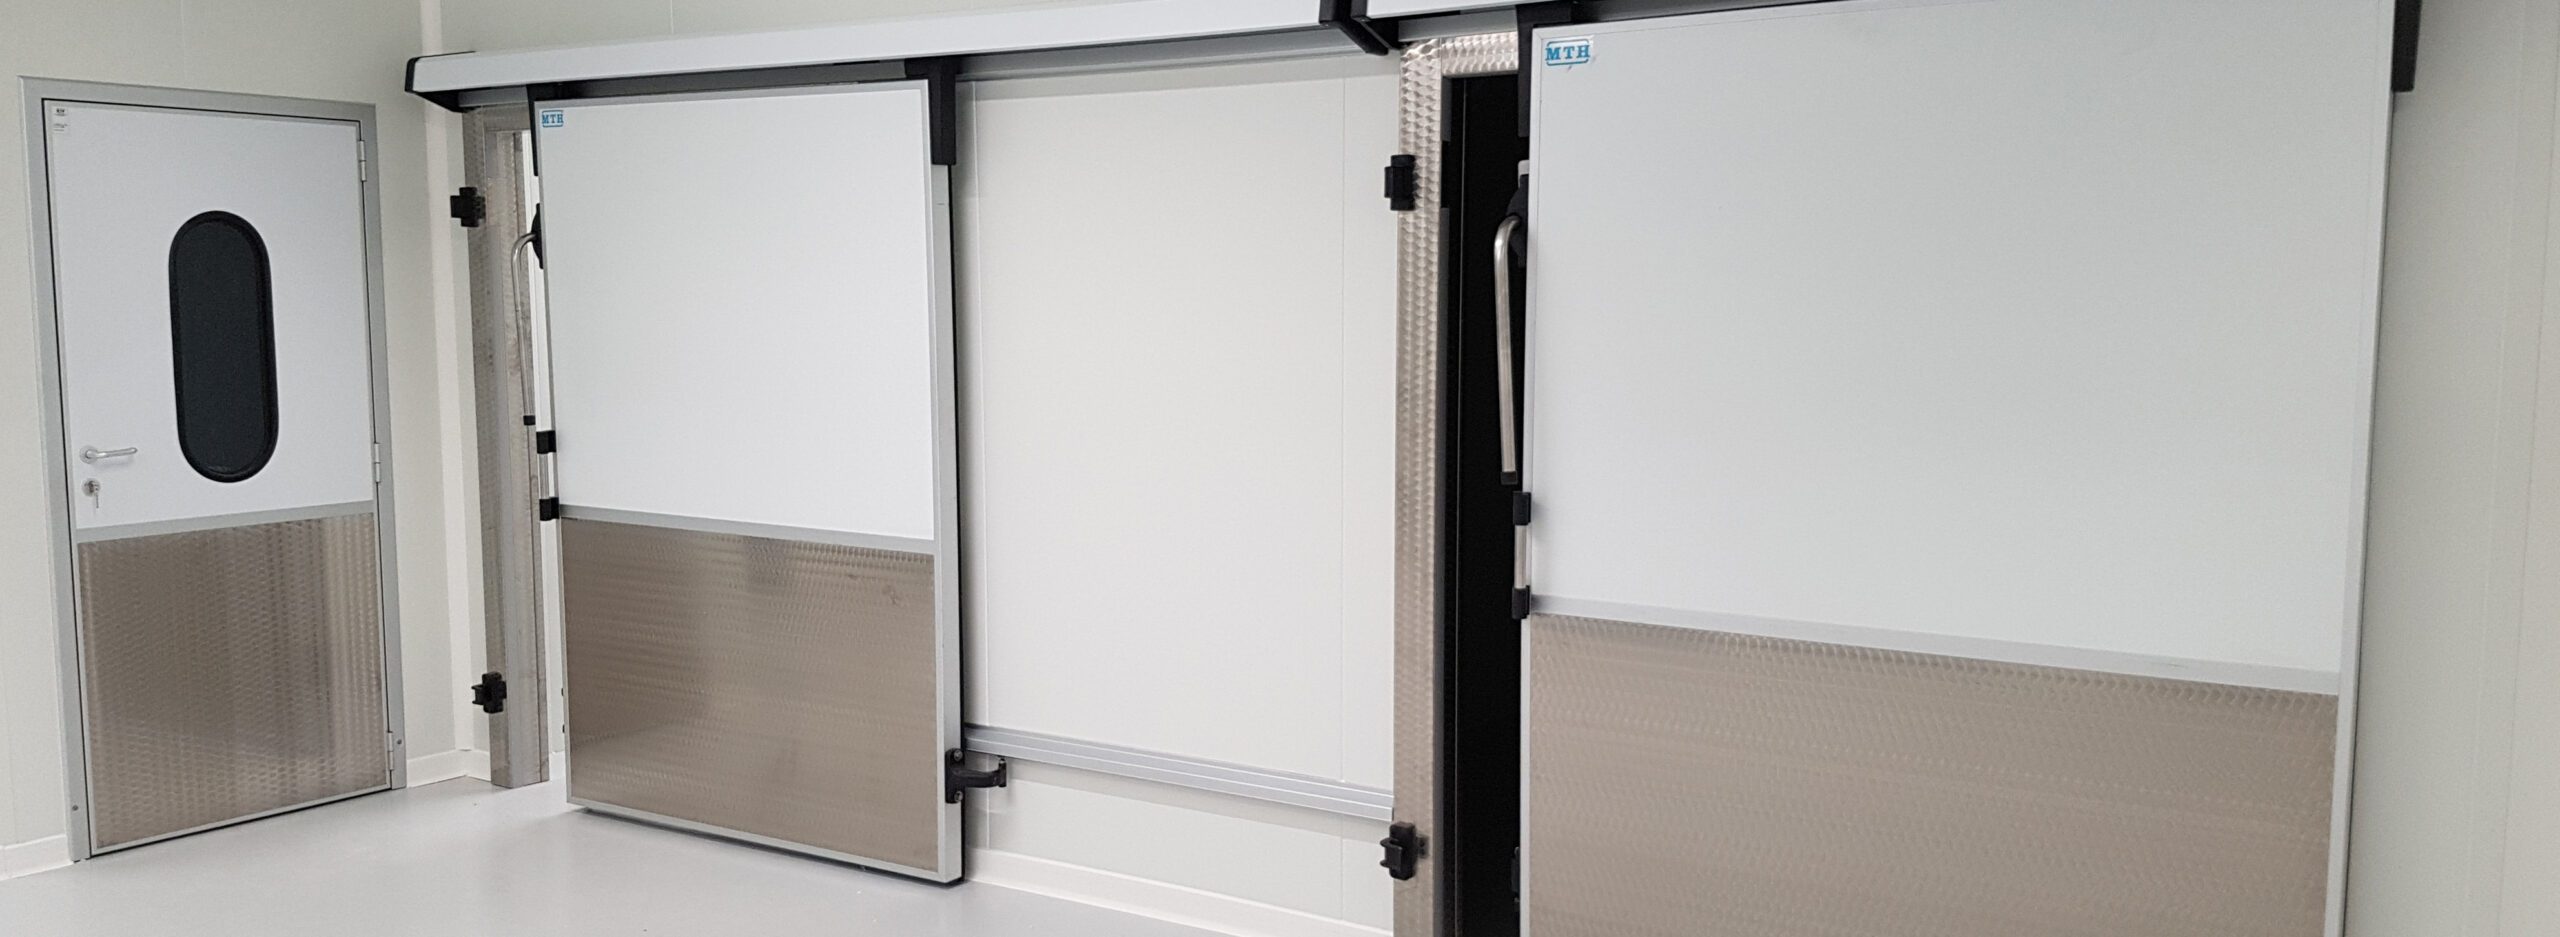 Sliding Hinged Cold Room Doors | MTCSS